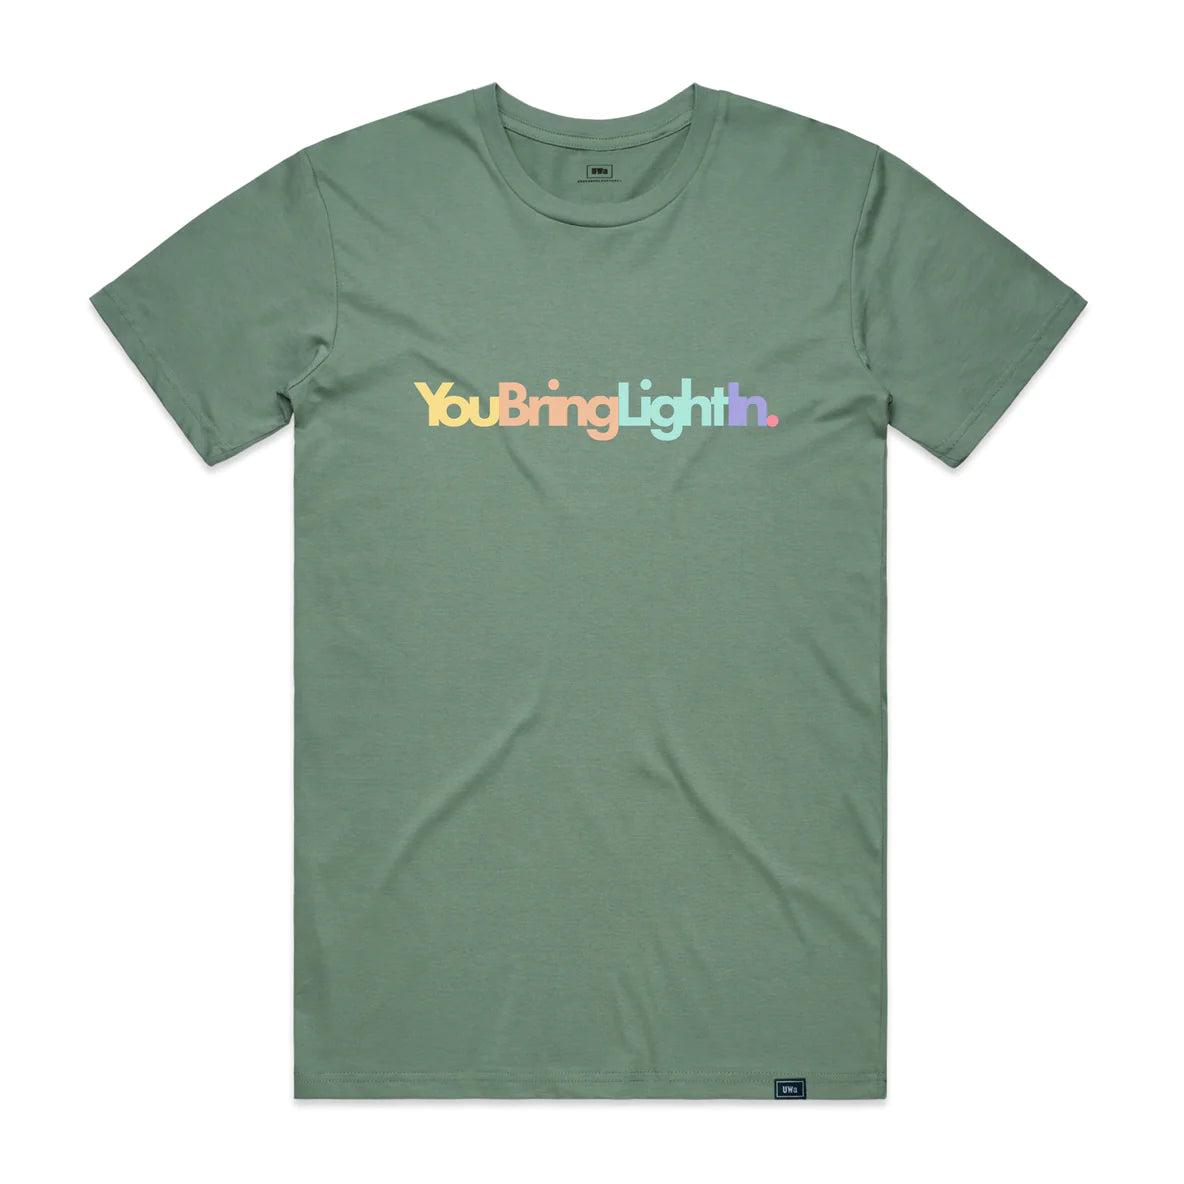 Underworld - Two Months Off Limited Drop* You Bring Light In Green Tee Shirt